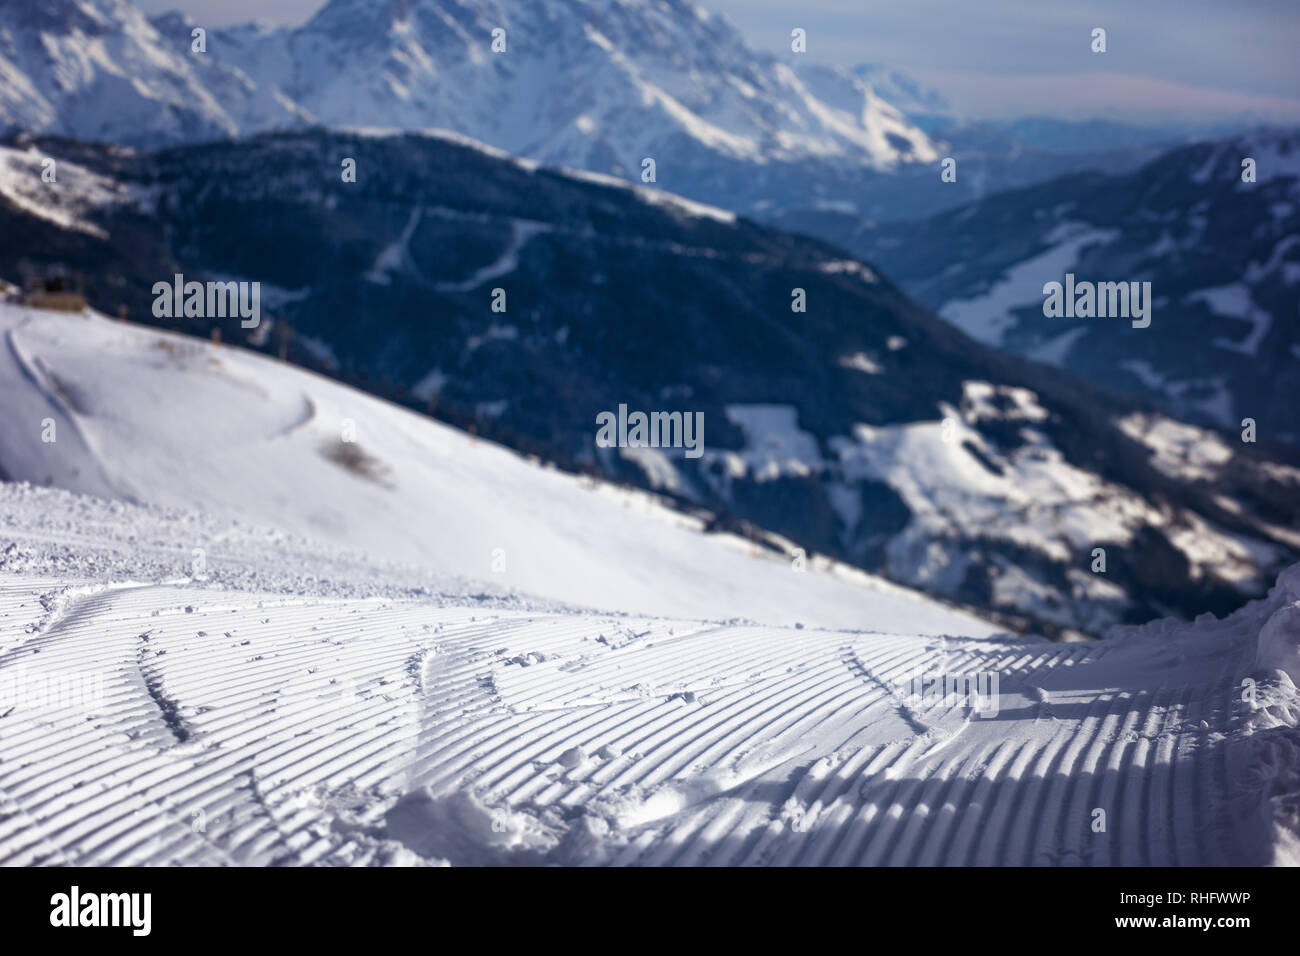 Close-up groomed snow at ski resort, slope banner background texture Stock Photo